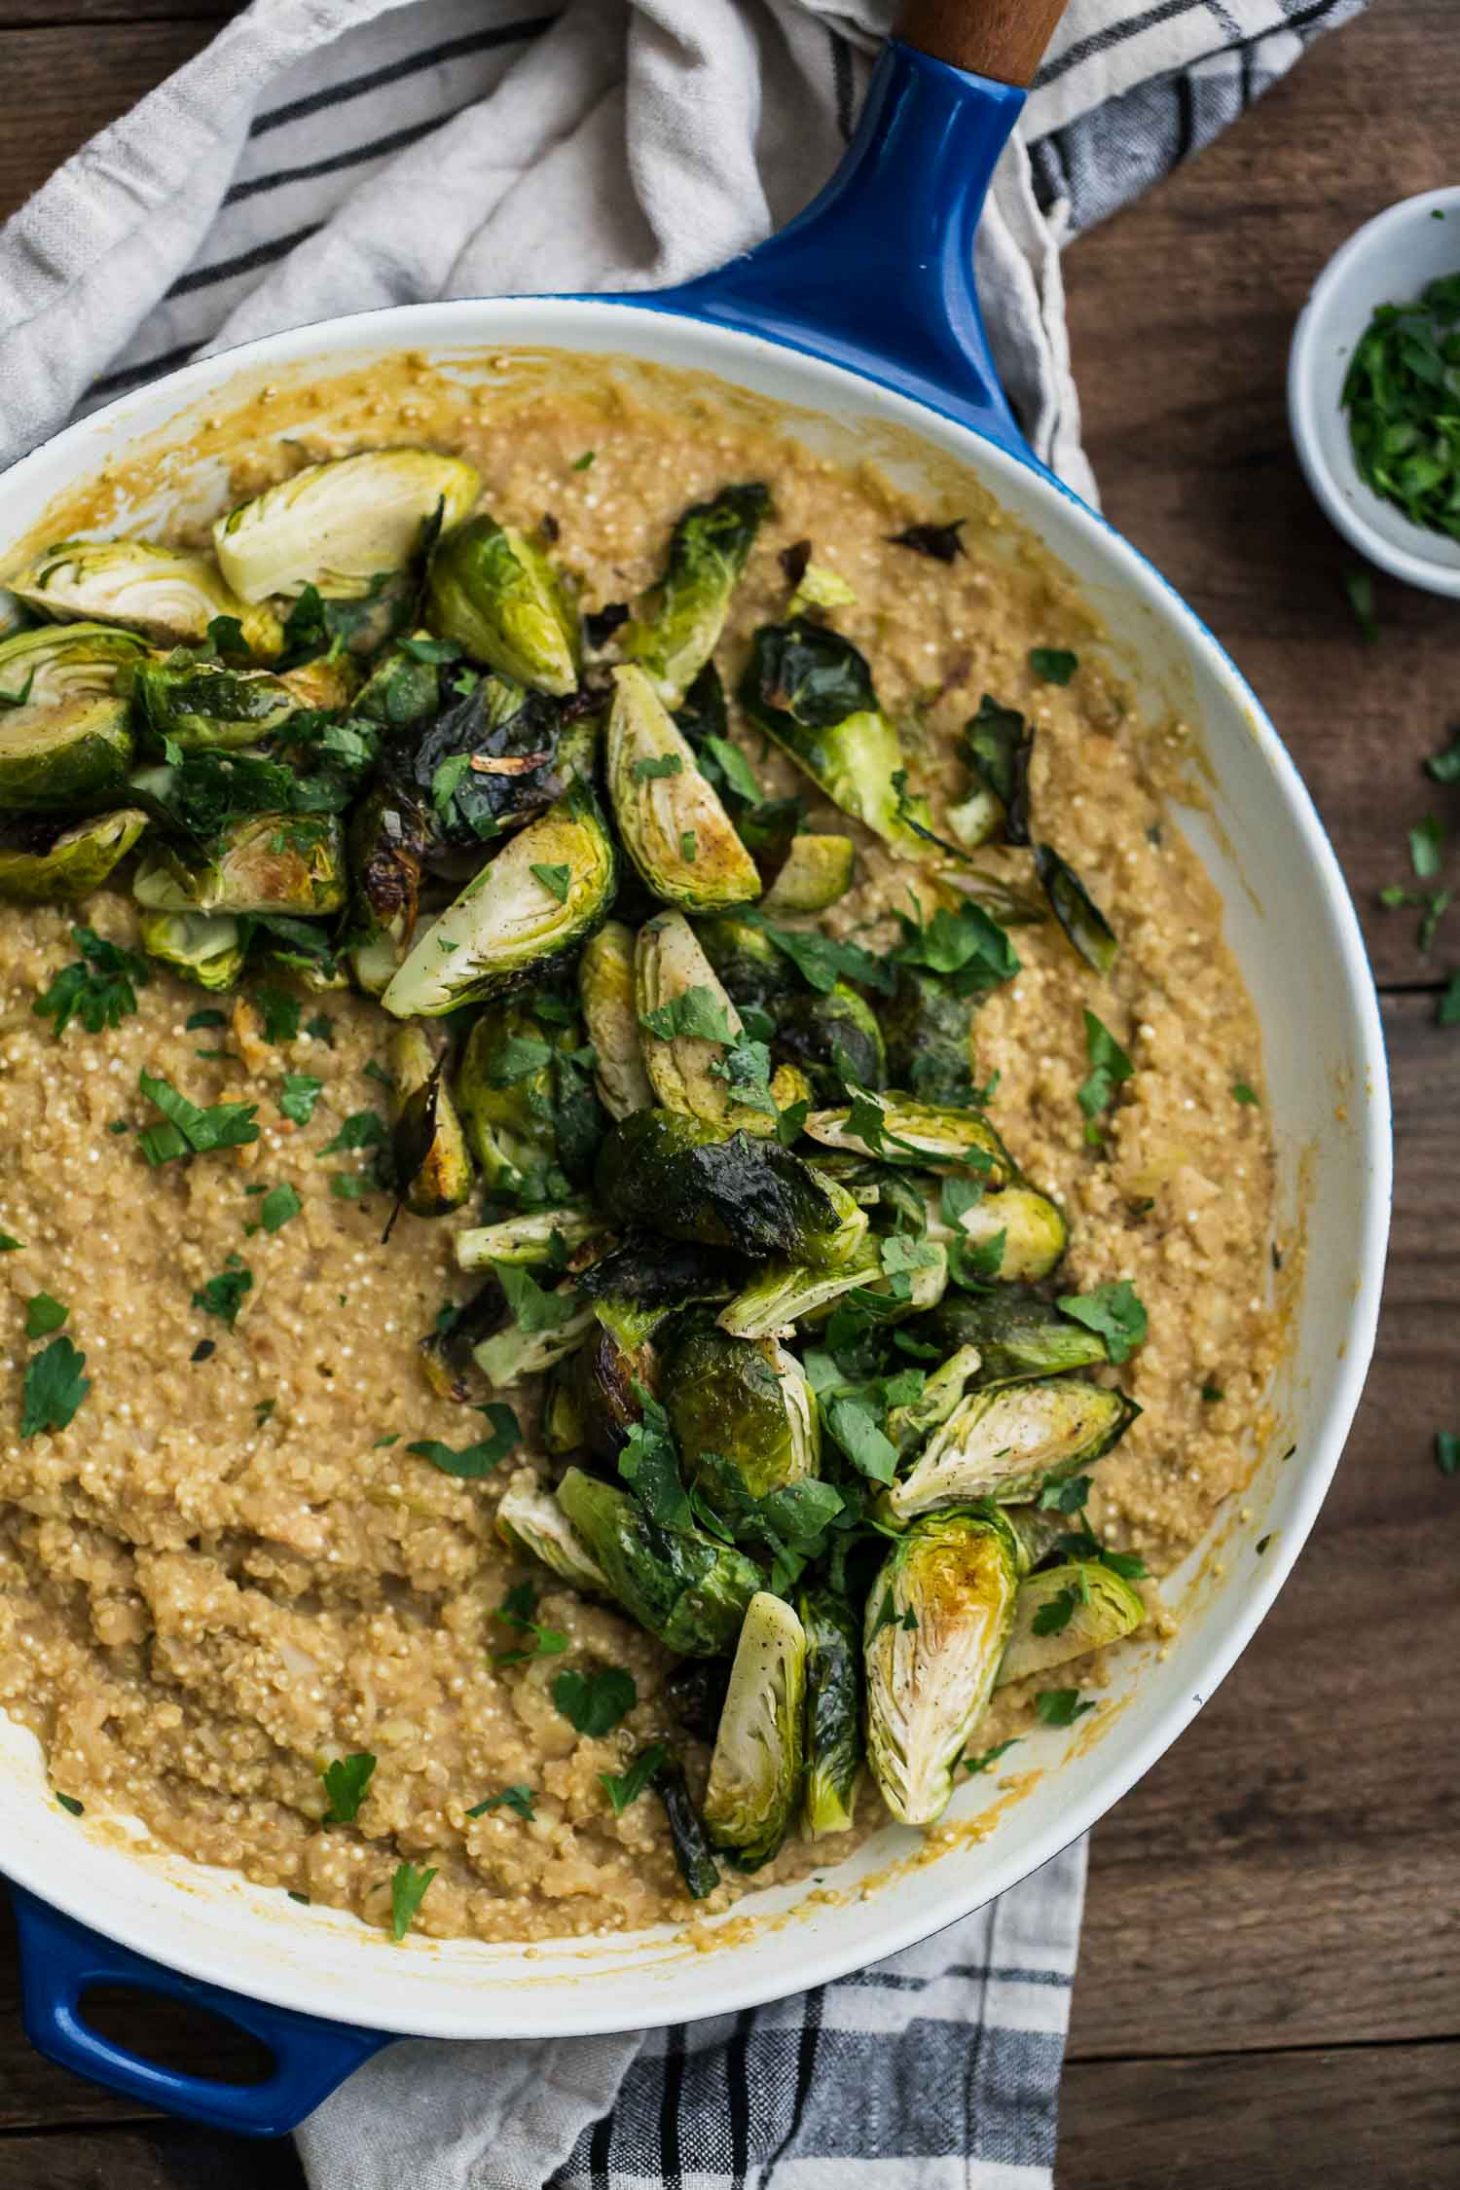 White Bean Quinoa Risotto with Roasted Brussels Sprouts from the First Mess Cookbook